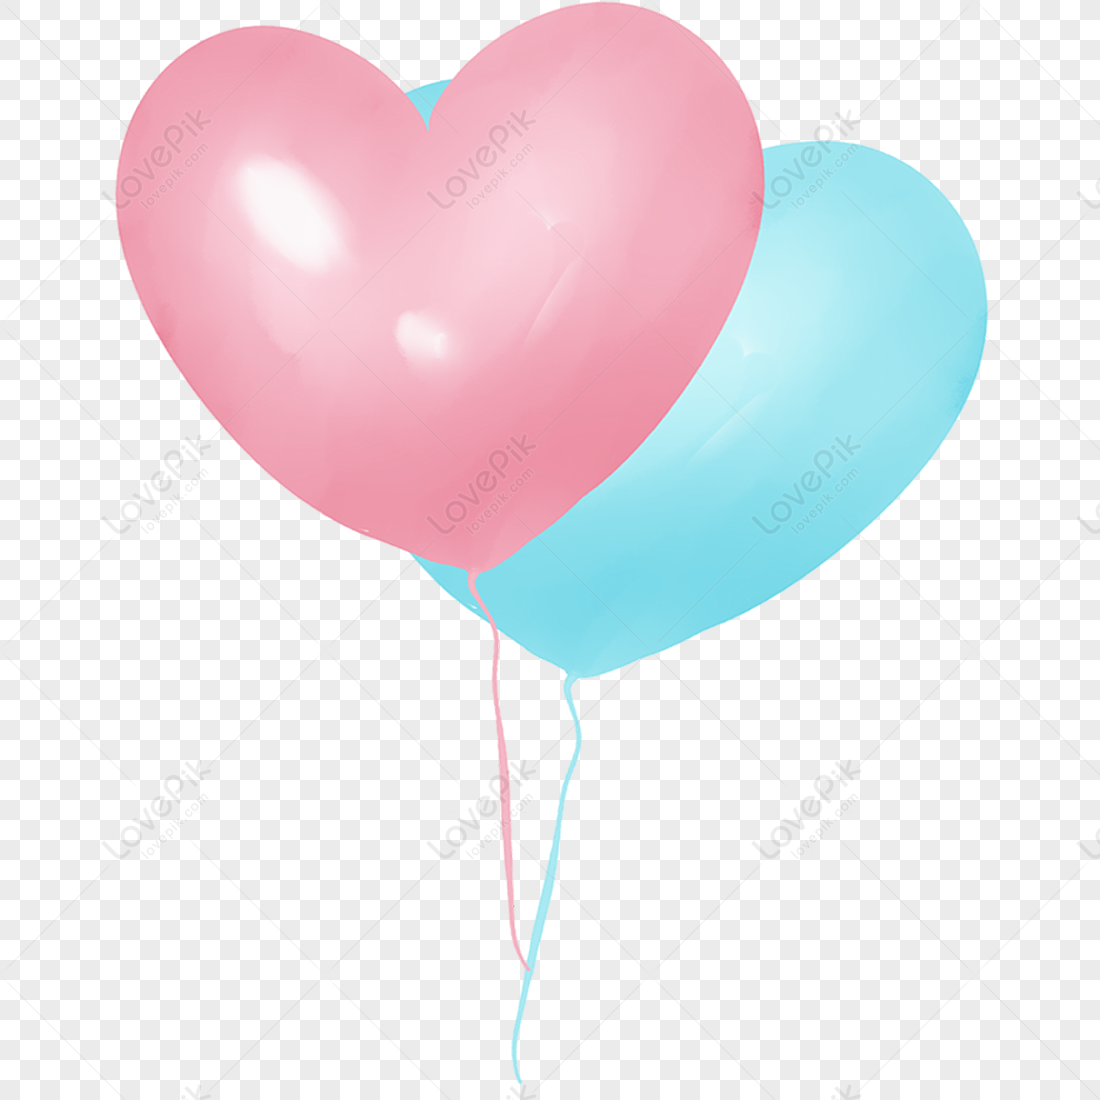 Details 100 balloon background png - Abzlocal.mx